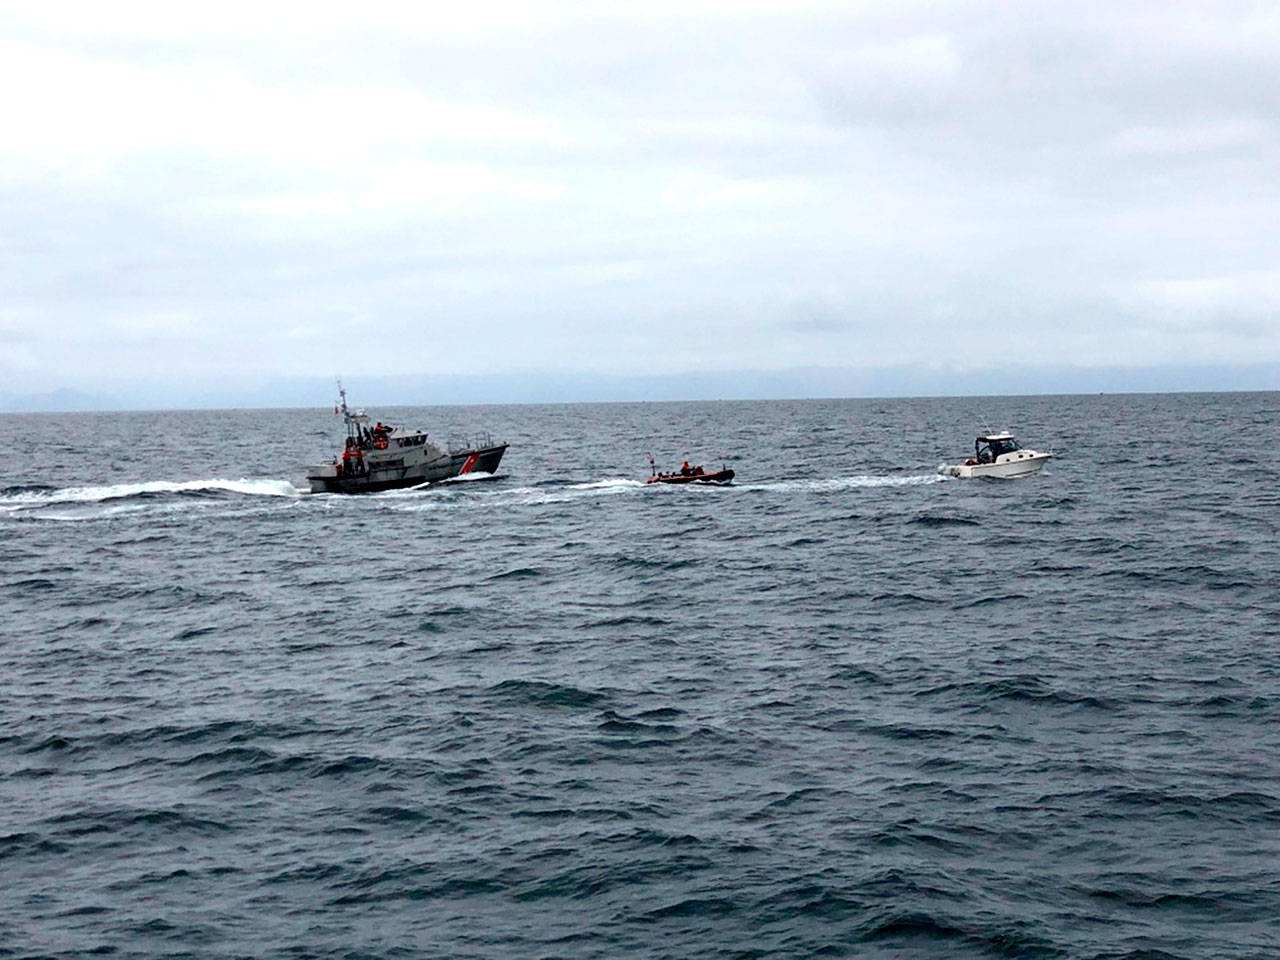 Coast Guard crew members aboard a 47-foot Motor Life Boat from Station Neah Bay, and aboard the deployable craft of the Coast Guard cutter Wahoo, intercept and aid a 33-foot recreational vessel reportedly taking on water 25 nautical miles southwest of Neah Bay. (Cutter Wahoo/U.S. Coast Guard)